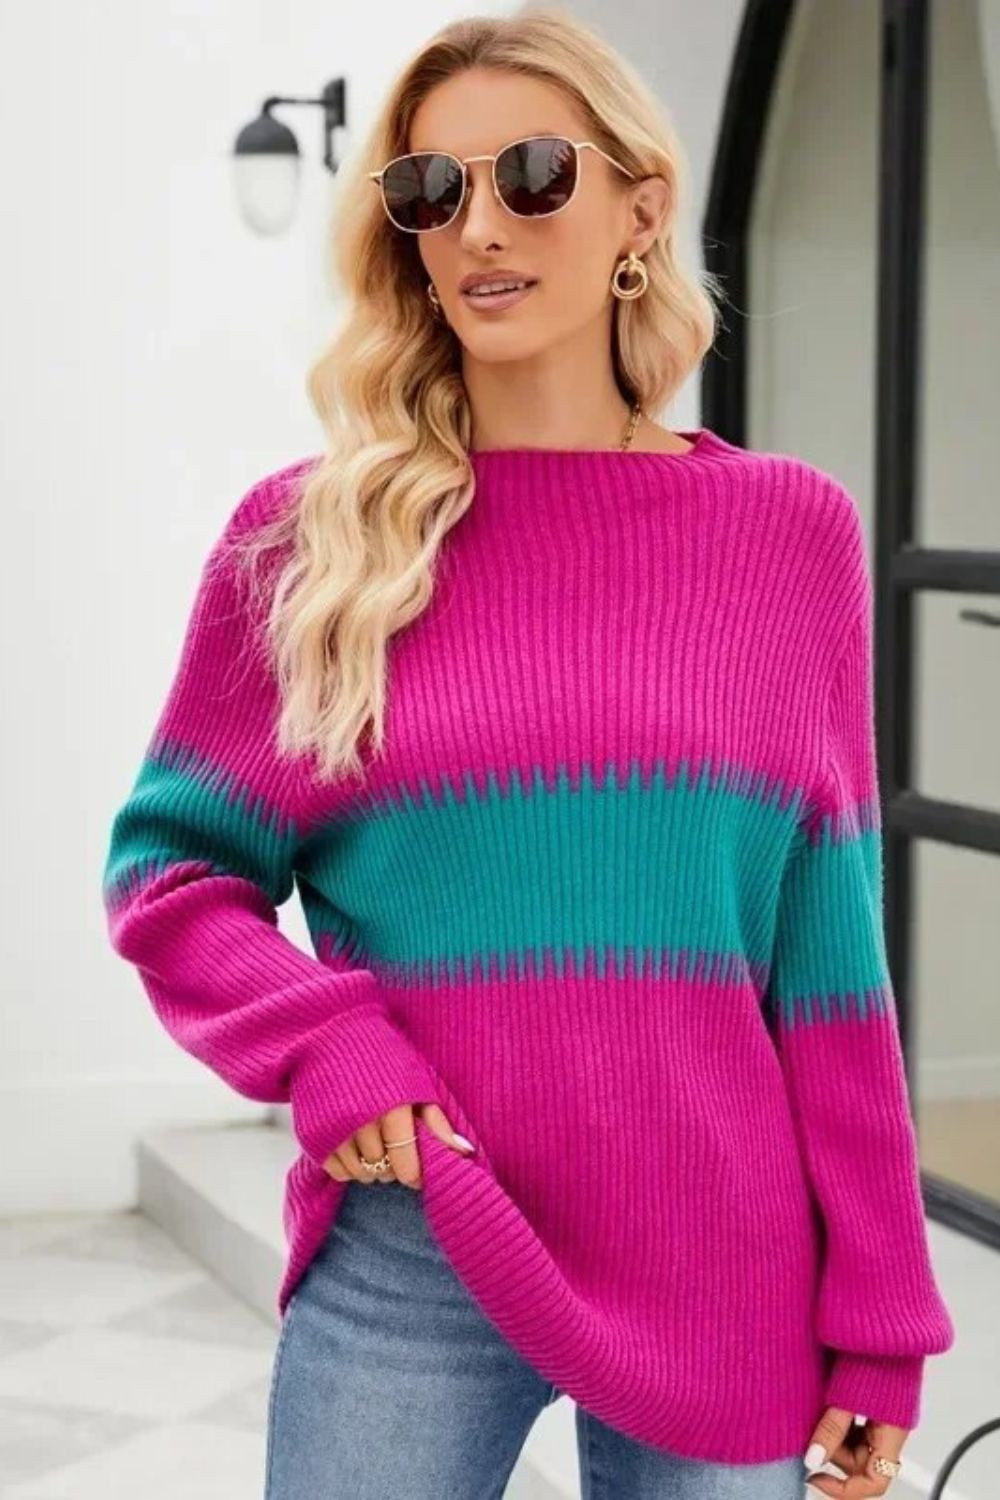 Gominglo - Casual Simple Turtleneck Sweater Long Sleeve Striped Pullover Sweater Chunky Knit Jumper GOMINGLO